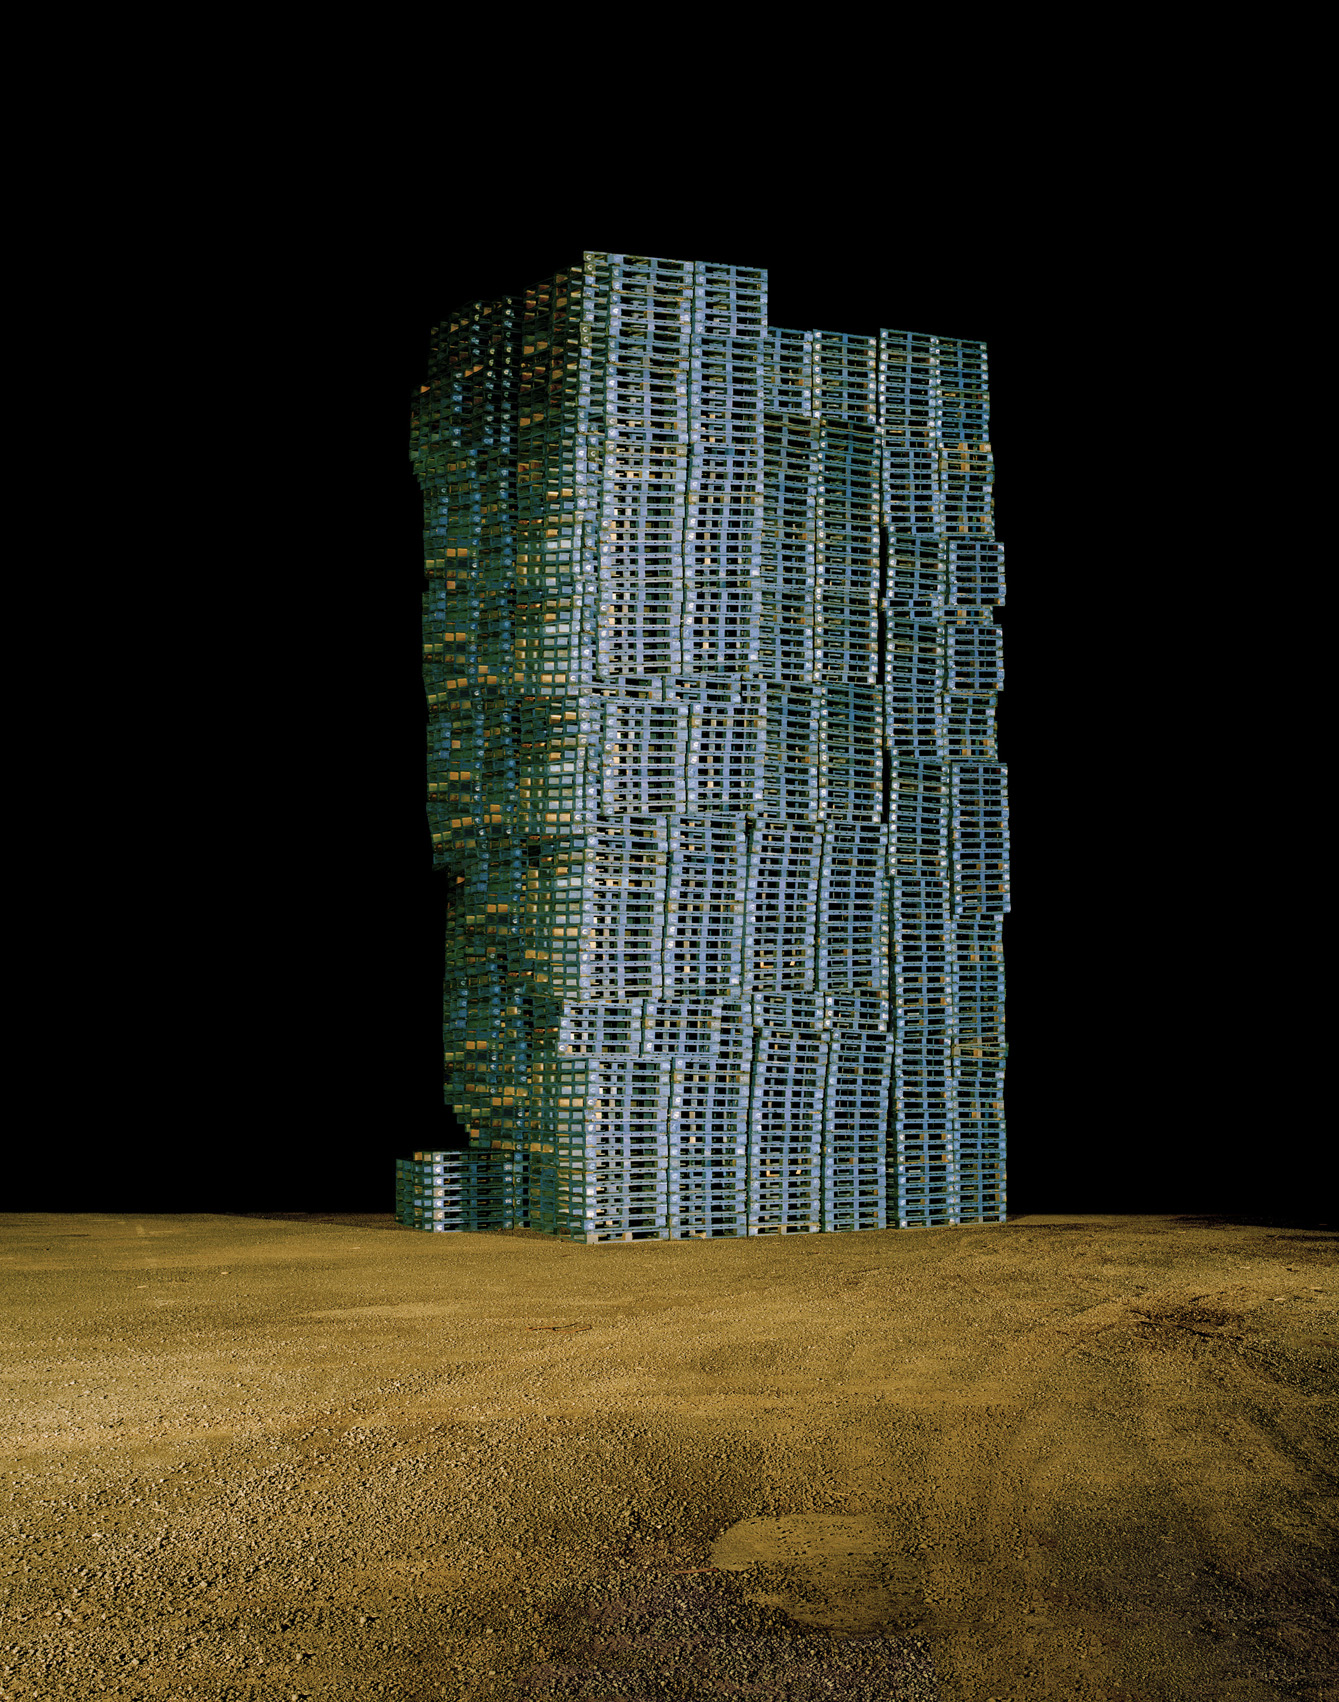 Reluctant Monoliths, 2009